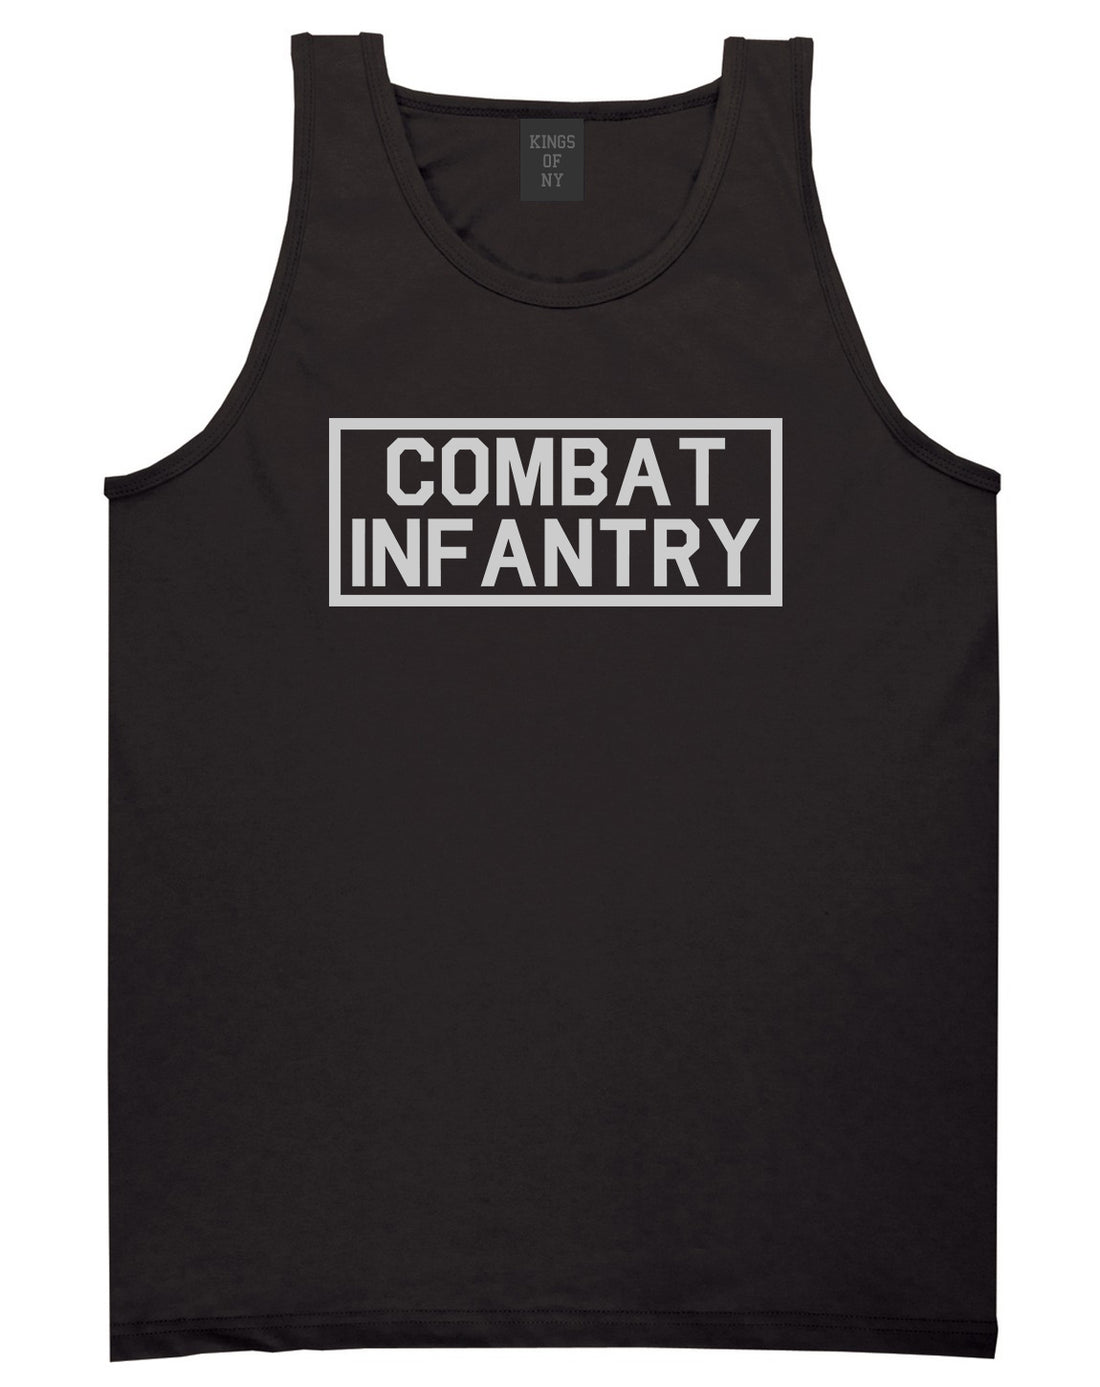 Combat Infantry Black Tank Top Shirt by Kings Of NY